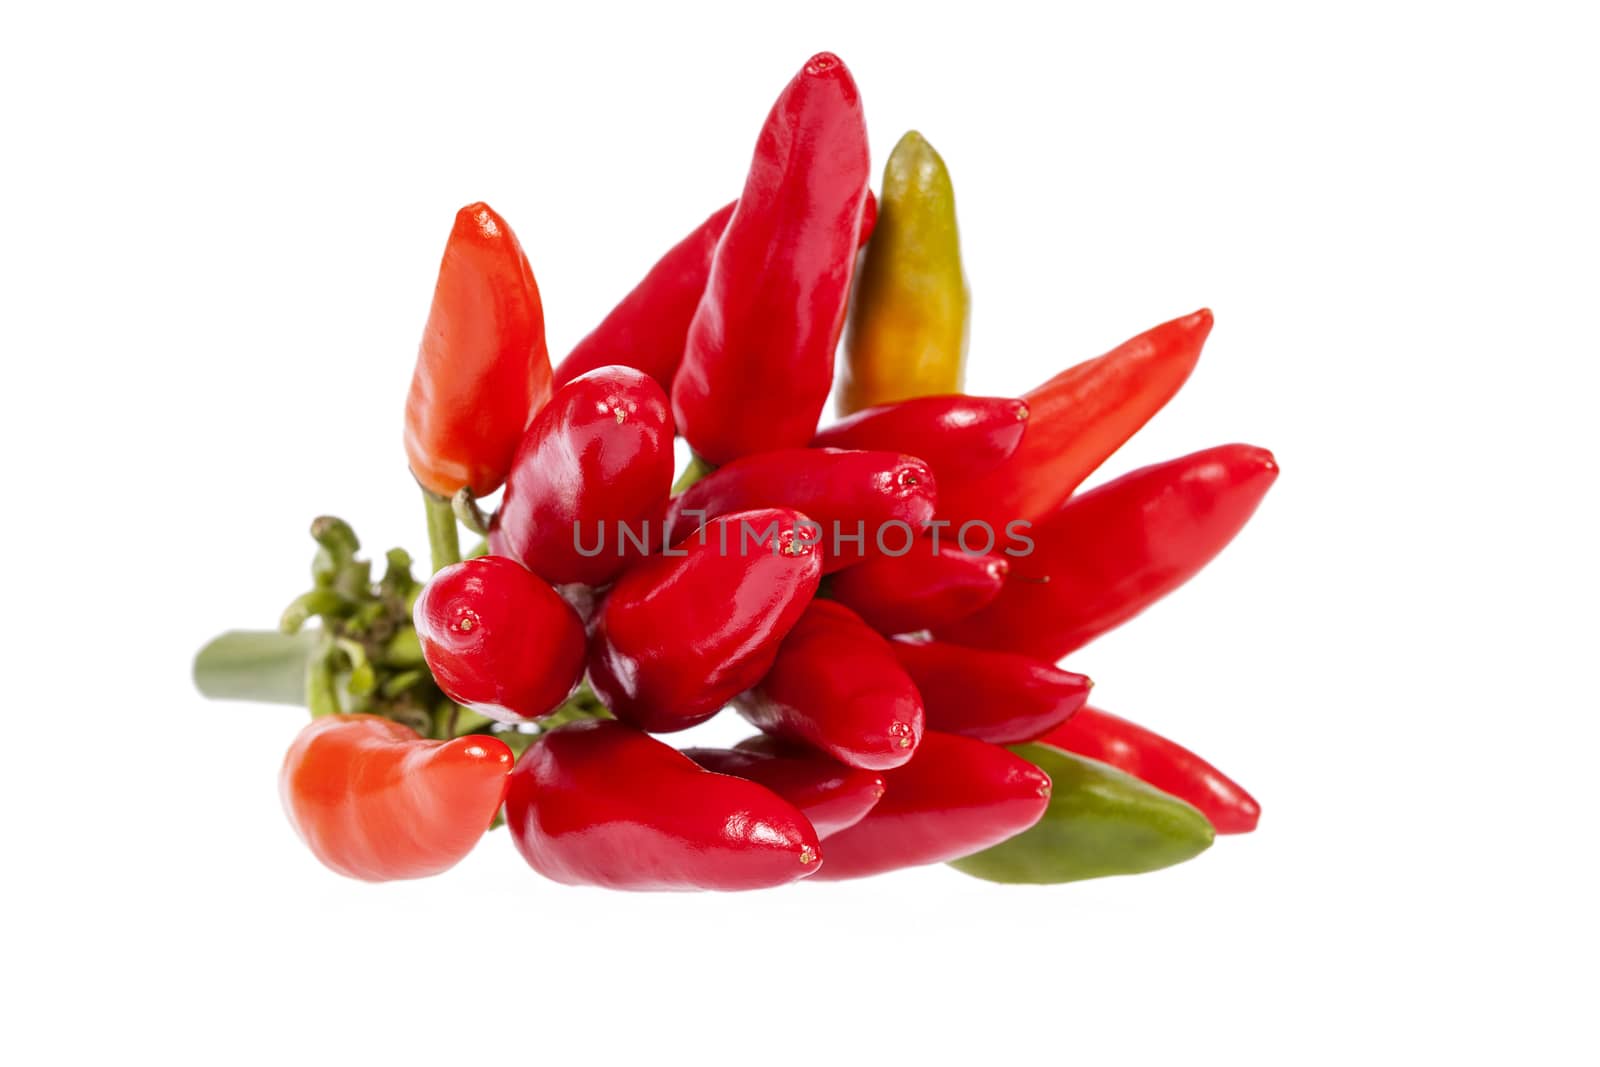 Composition of colorful decoration peppers isolated on white background, close up